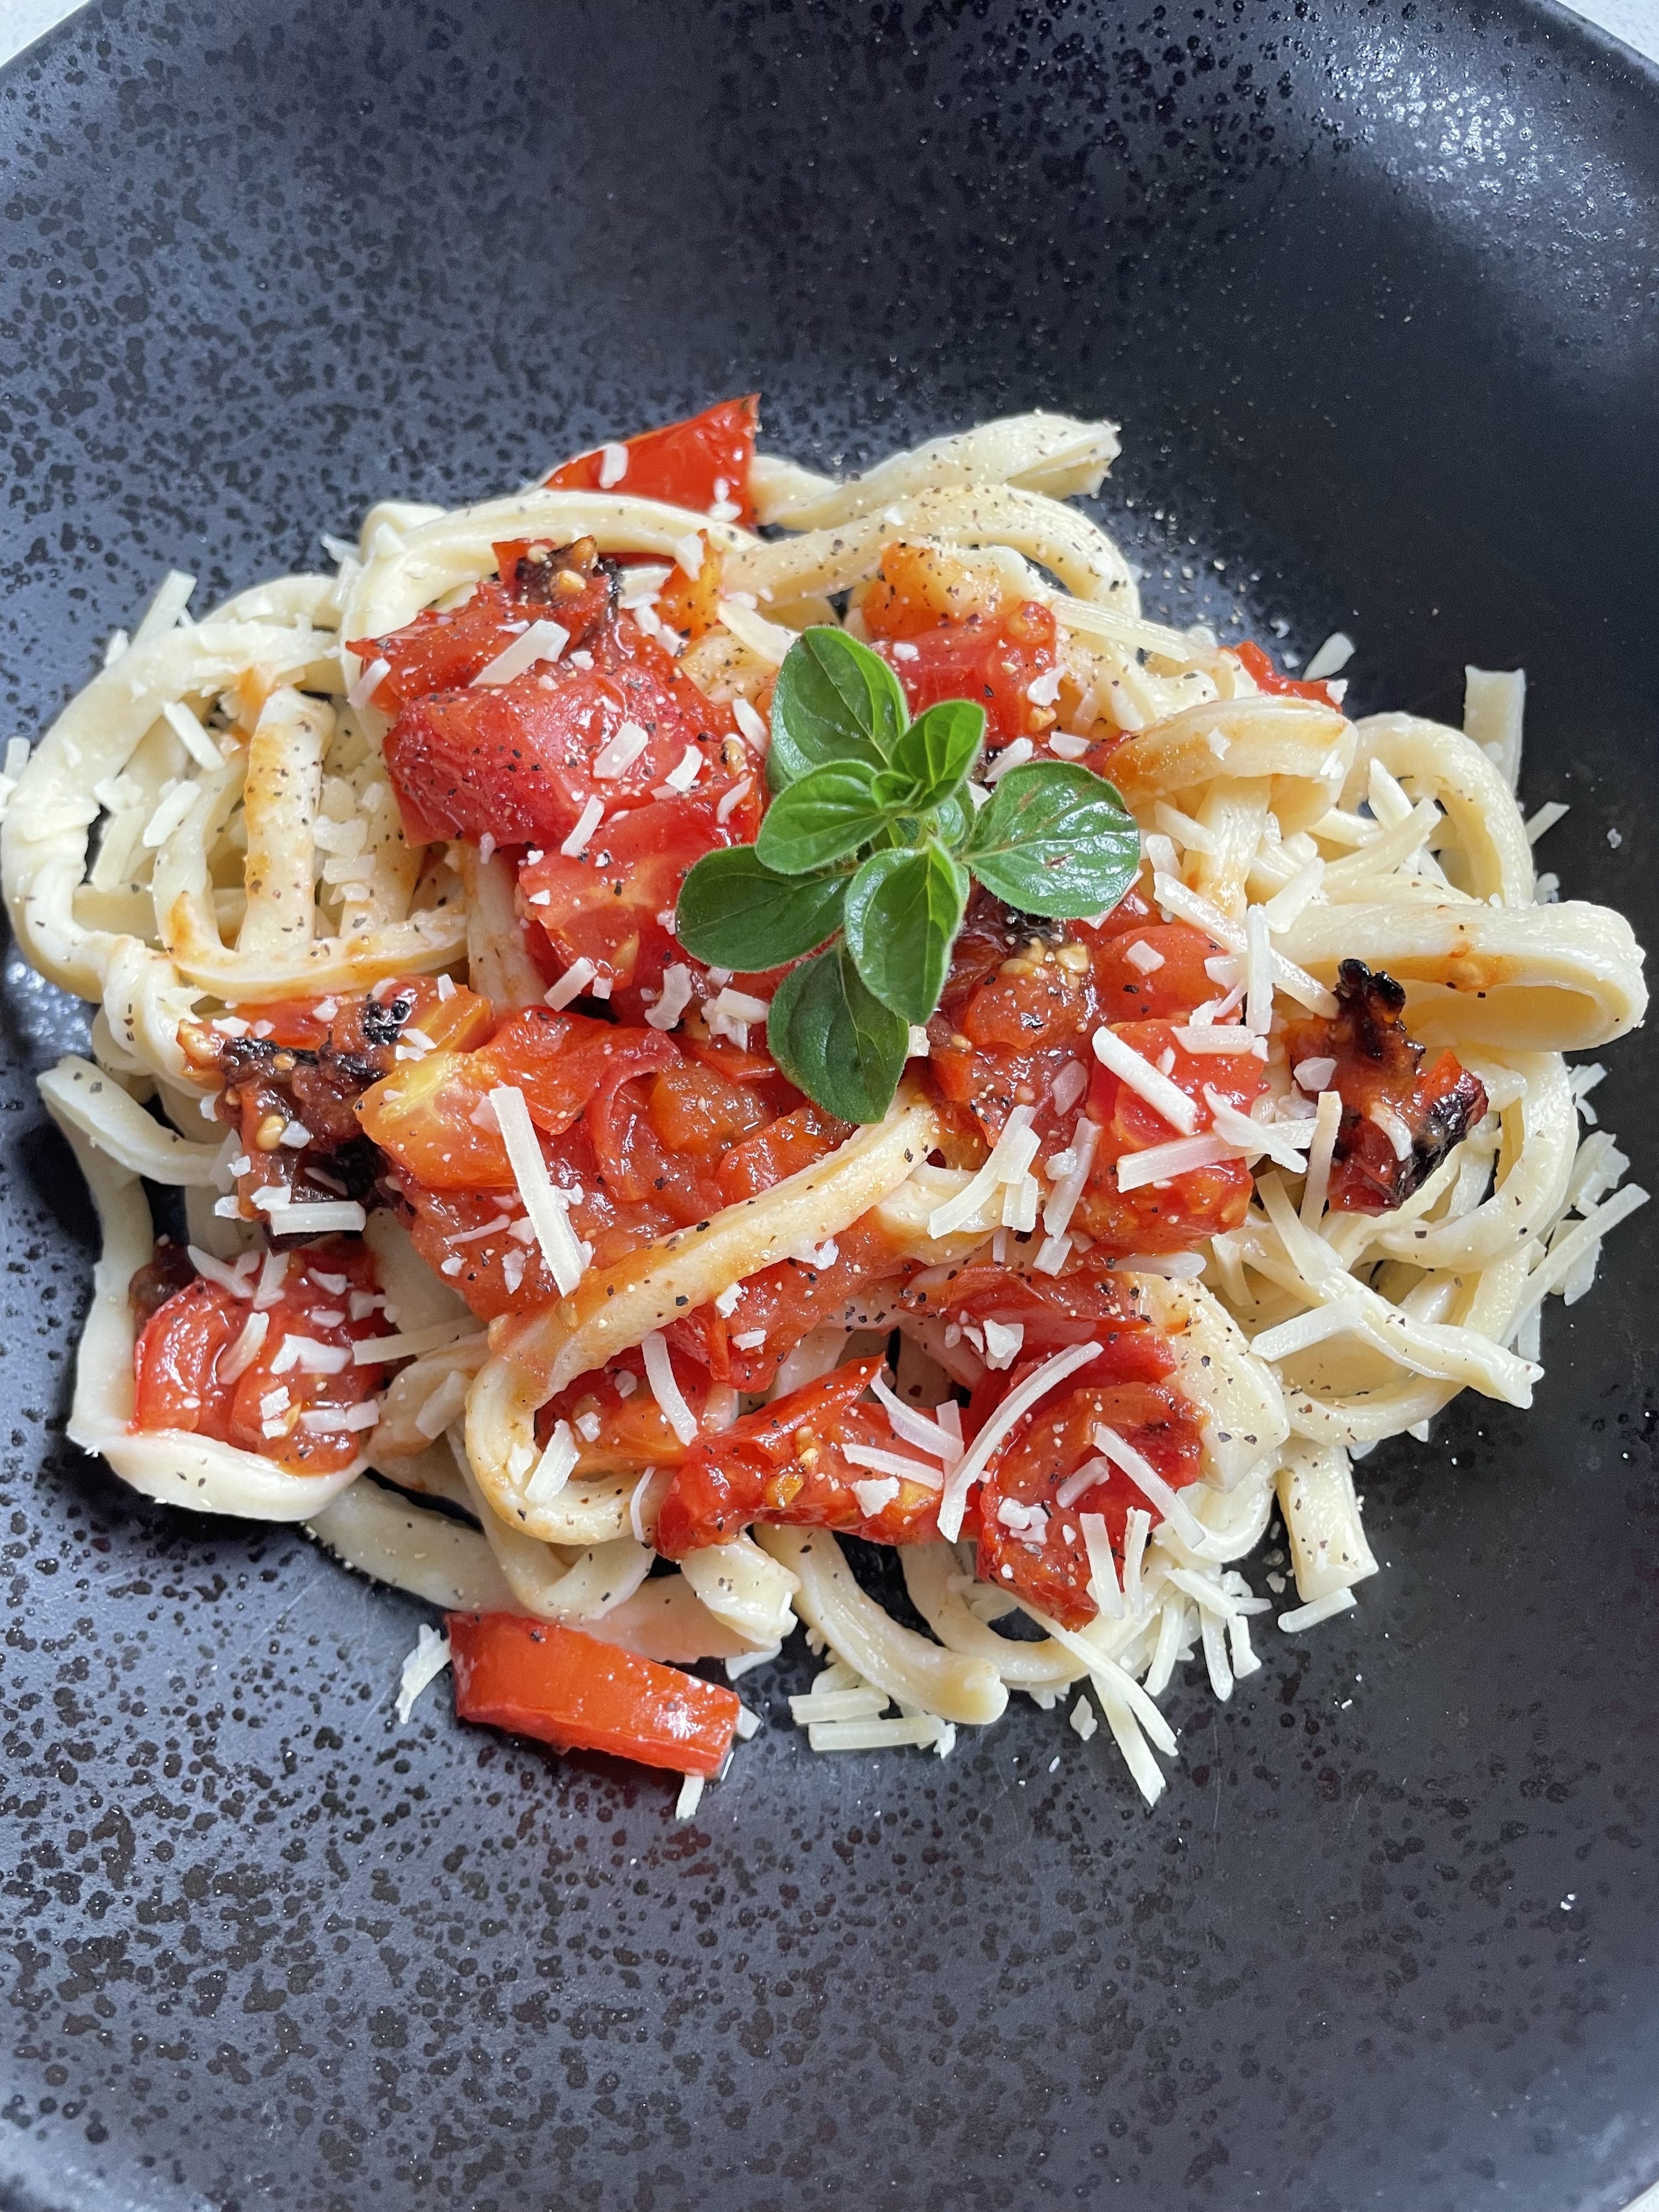 Pasta and tomatoes in a bowl